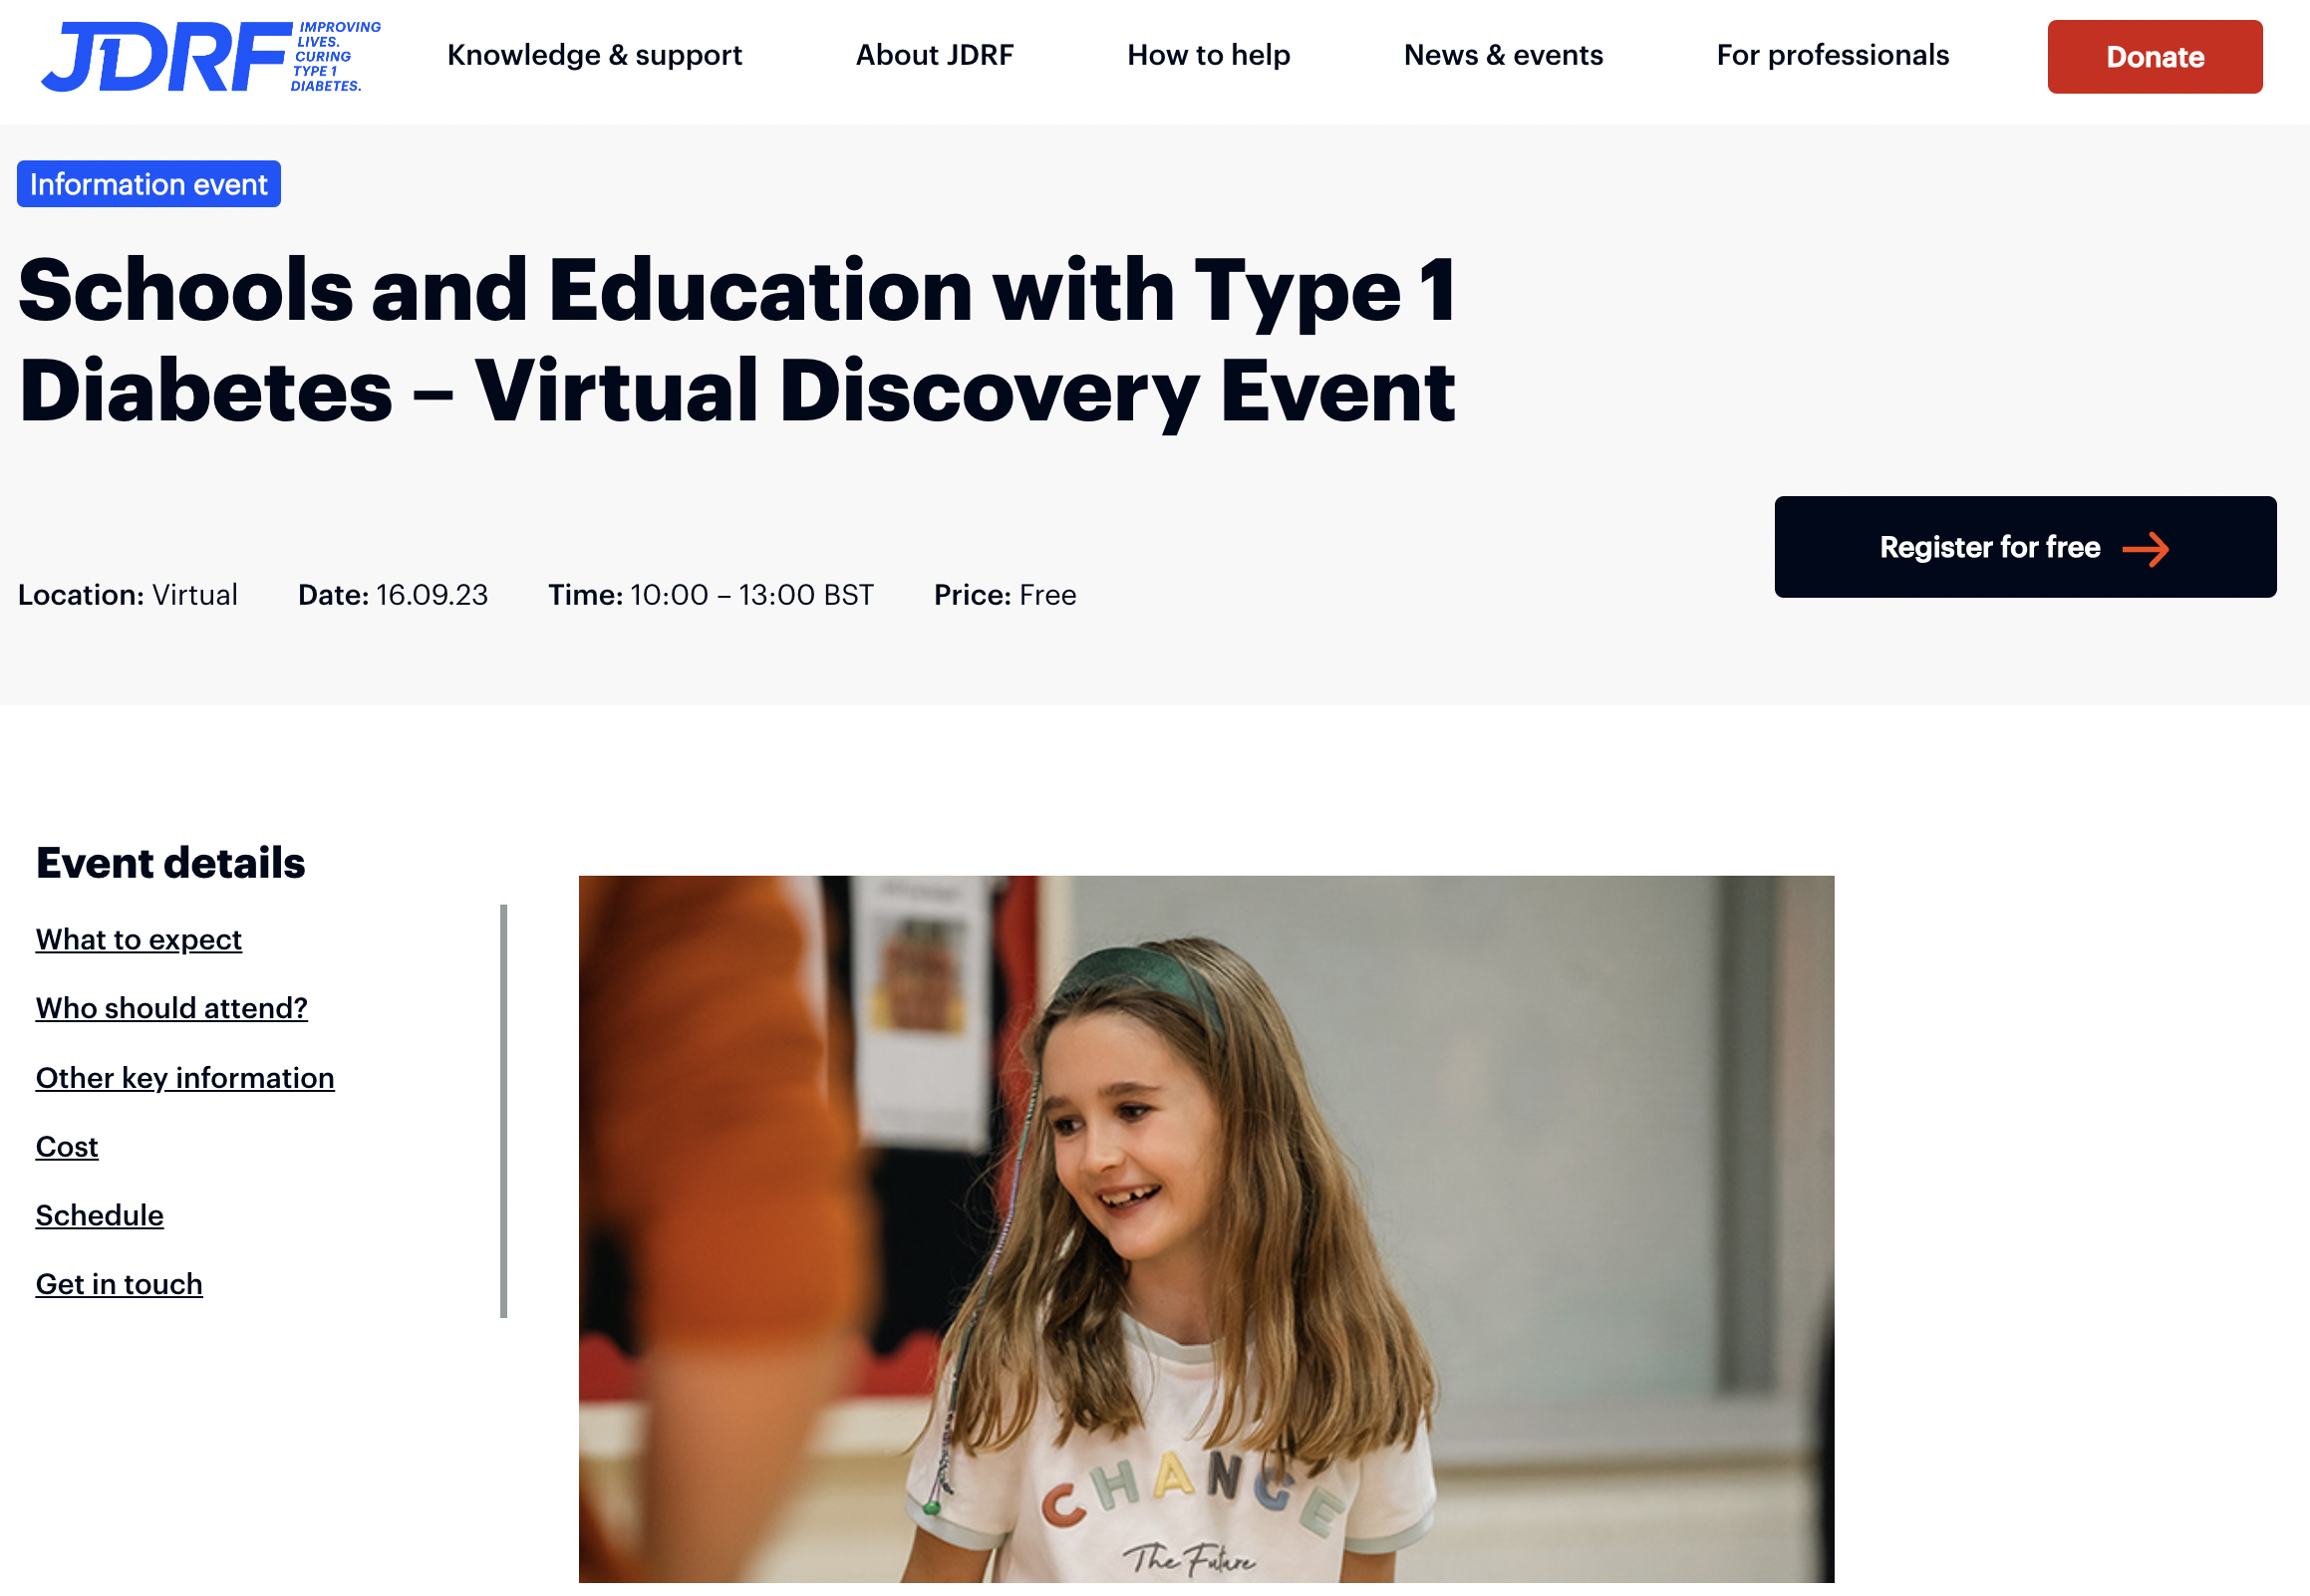 JDRF & DigiBete’s Schools and Education with Type 1 Diabetes - Virtual Discovery Event on 16th September